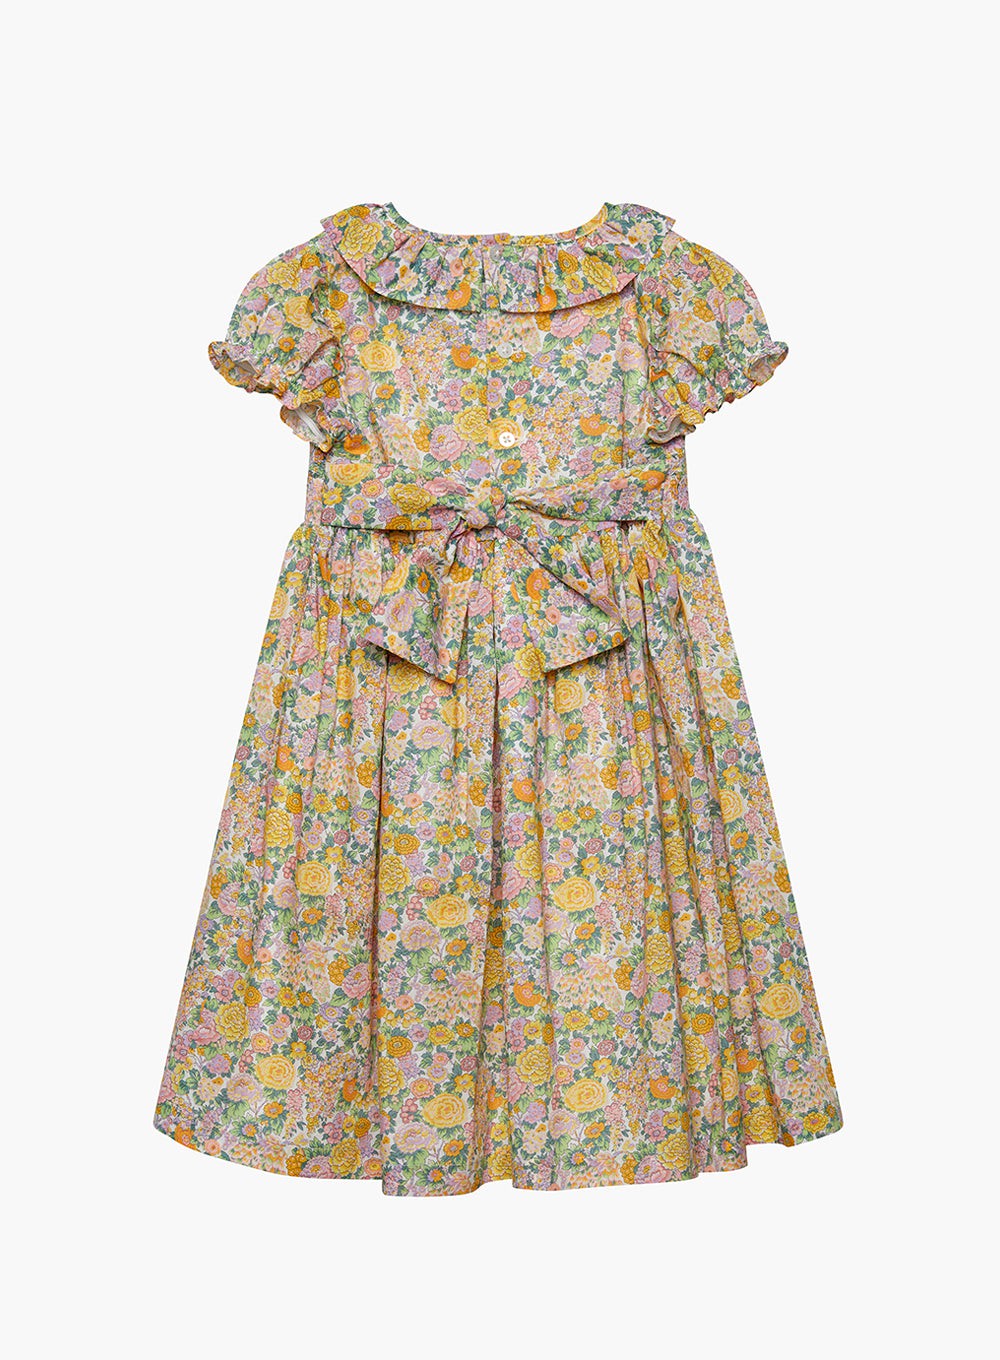 Lily Rose Girls Elysian Day Smocked Dress | Trotters London